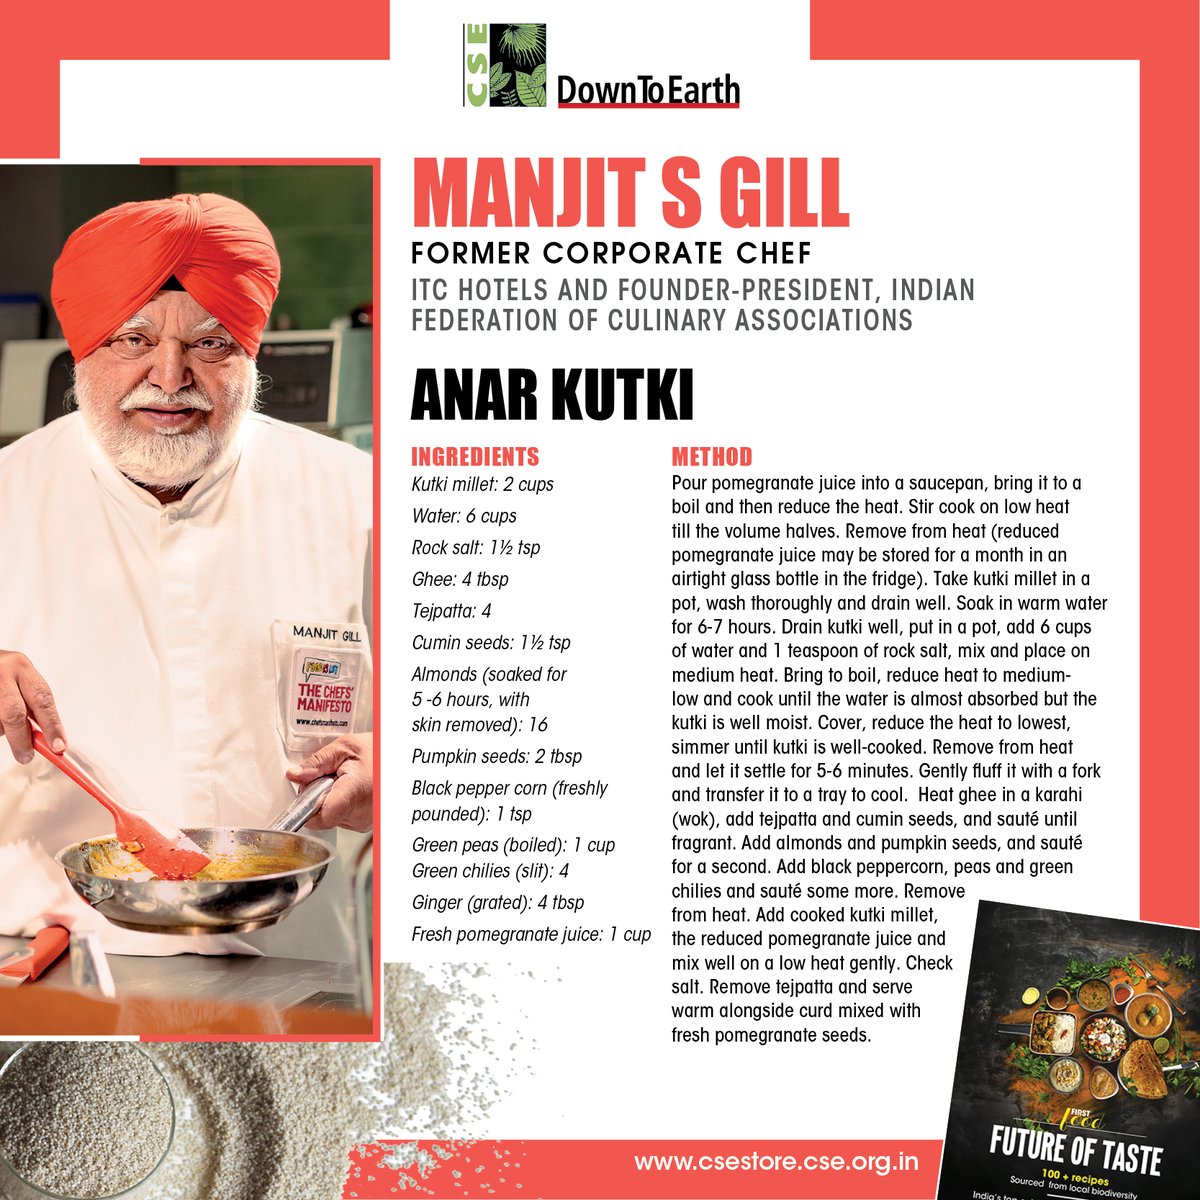 Chef Manjit S Gill combines Kutki Milllet with pomegranate juice to prepare a refreshing dish! downtoearth.org.in/news/food/pani… Find more such recipes in our upcoming book 'Future of Taste' to be released March 12, 6pm onwards, at @IHCDelhi. Register here: cseindia.org/book-release-f…